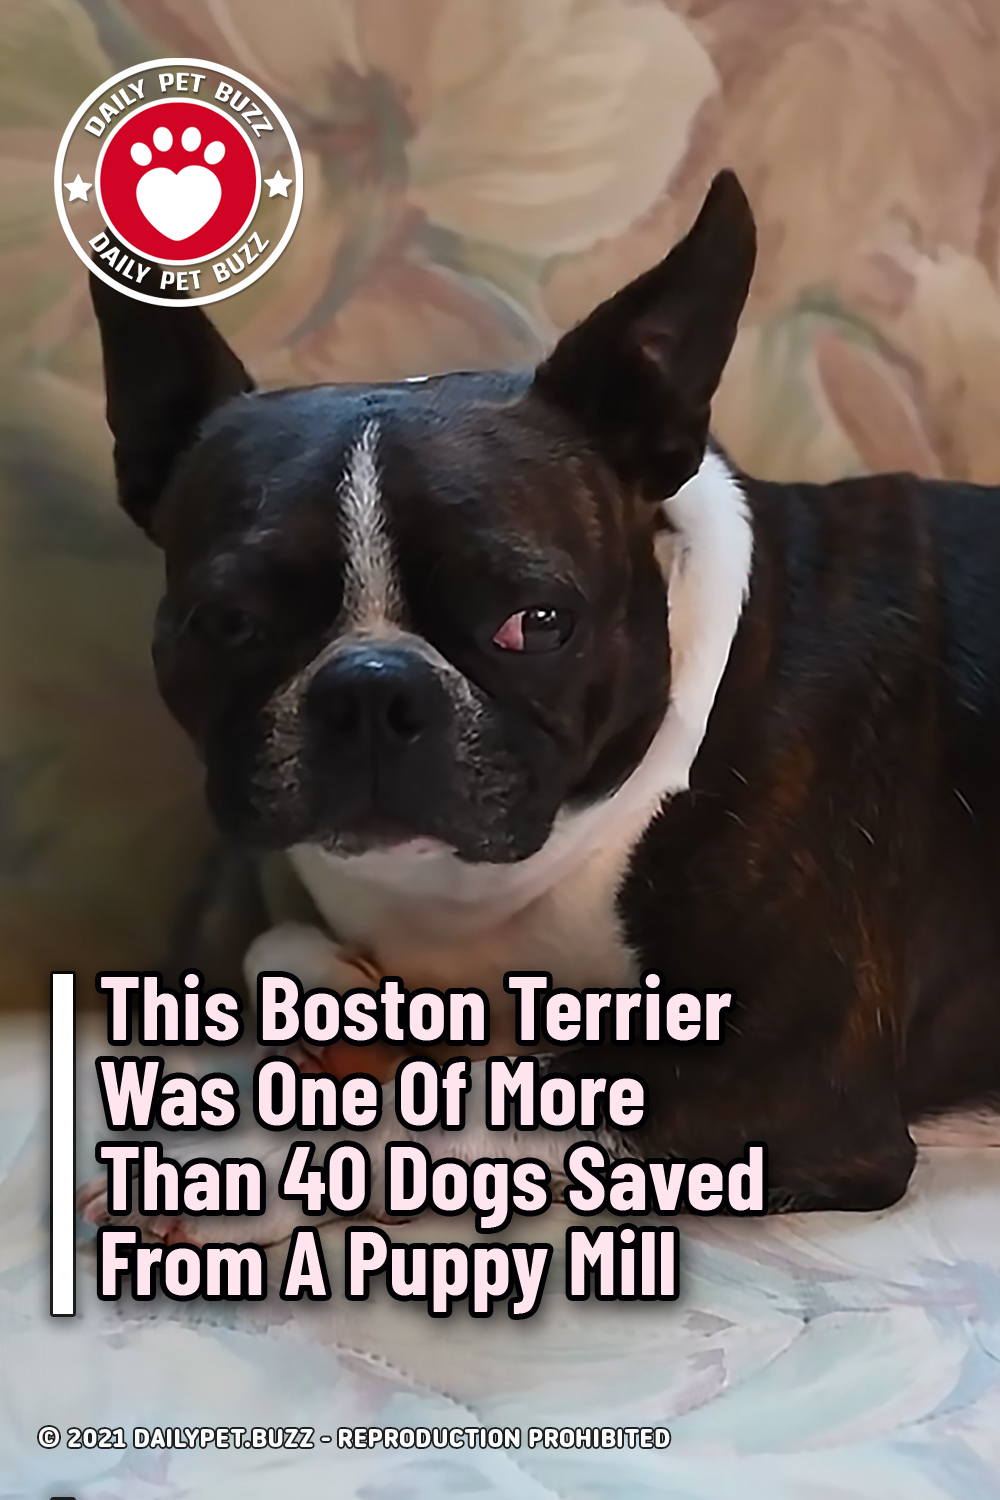 This Boston Terrier Was One Of More Than 40 Dogs Saved From A Puppy Mill